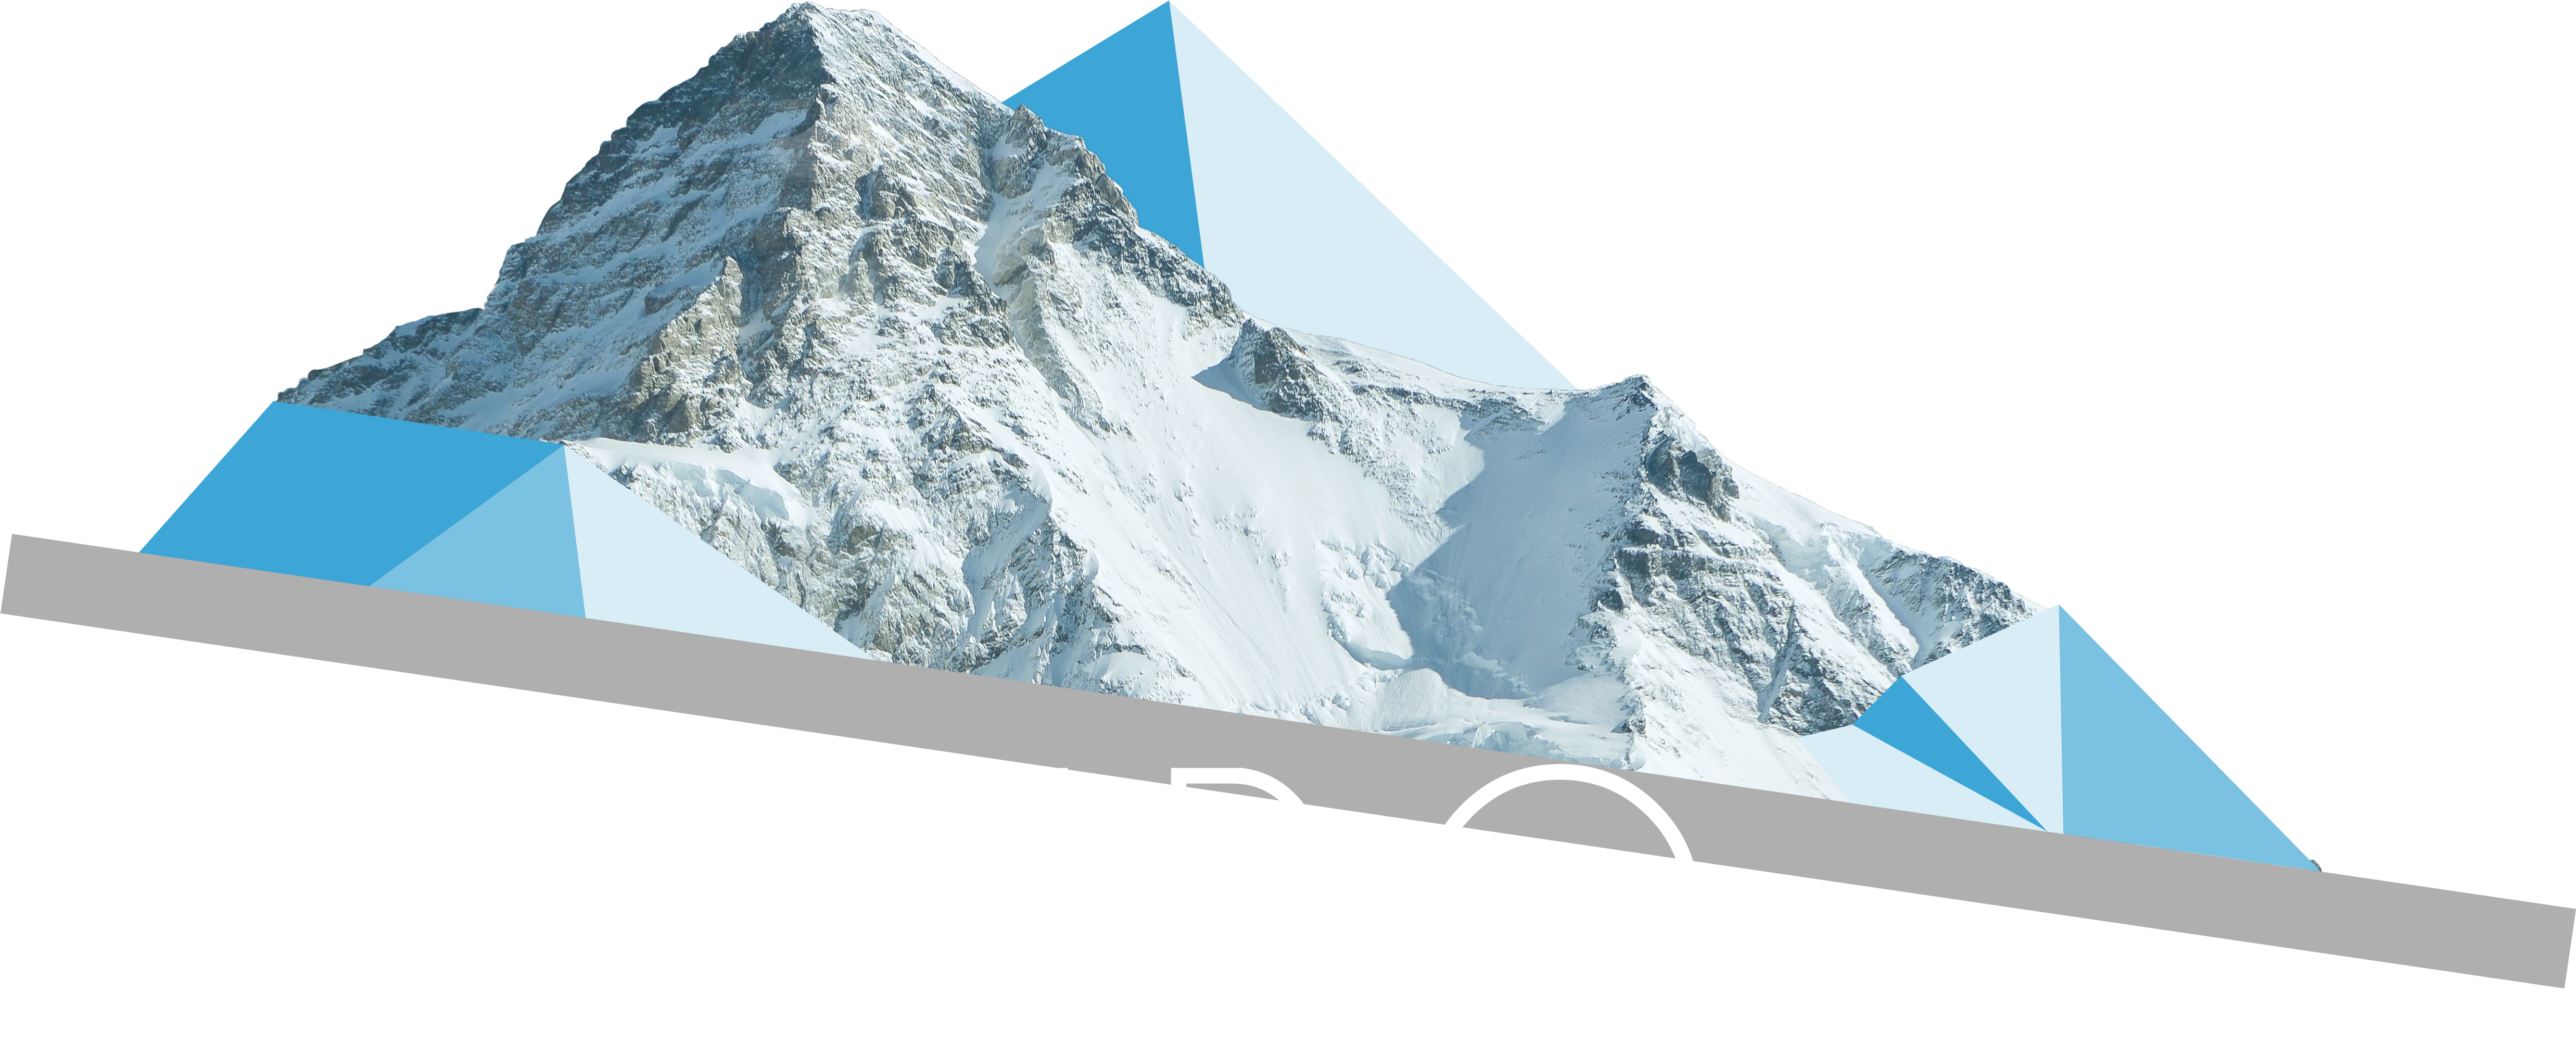 A Mountain With Snow And Text